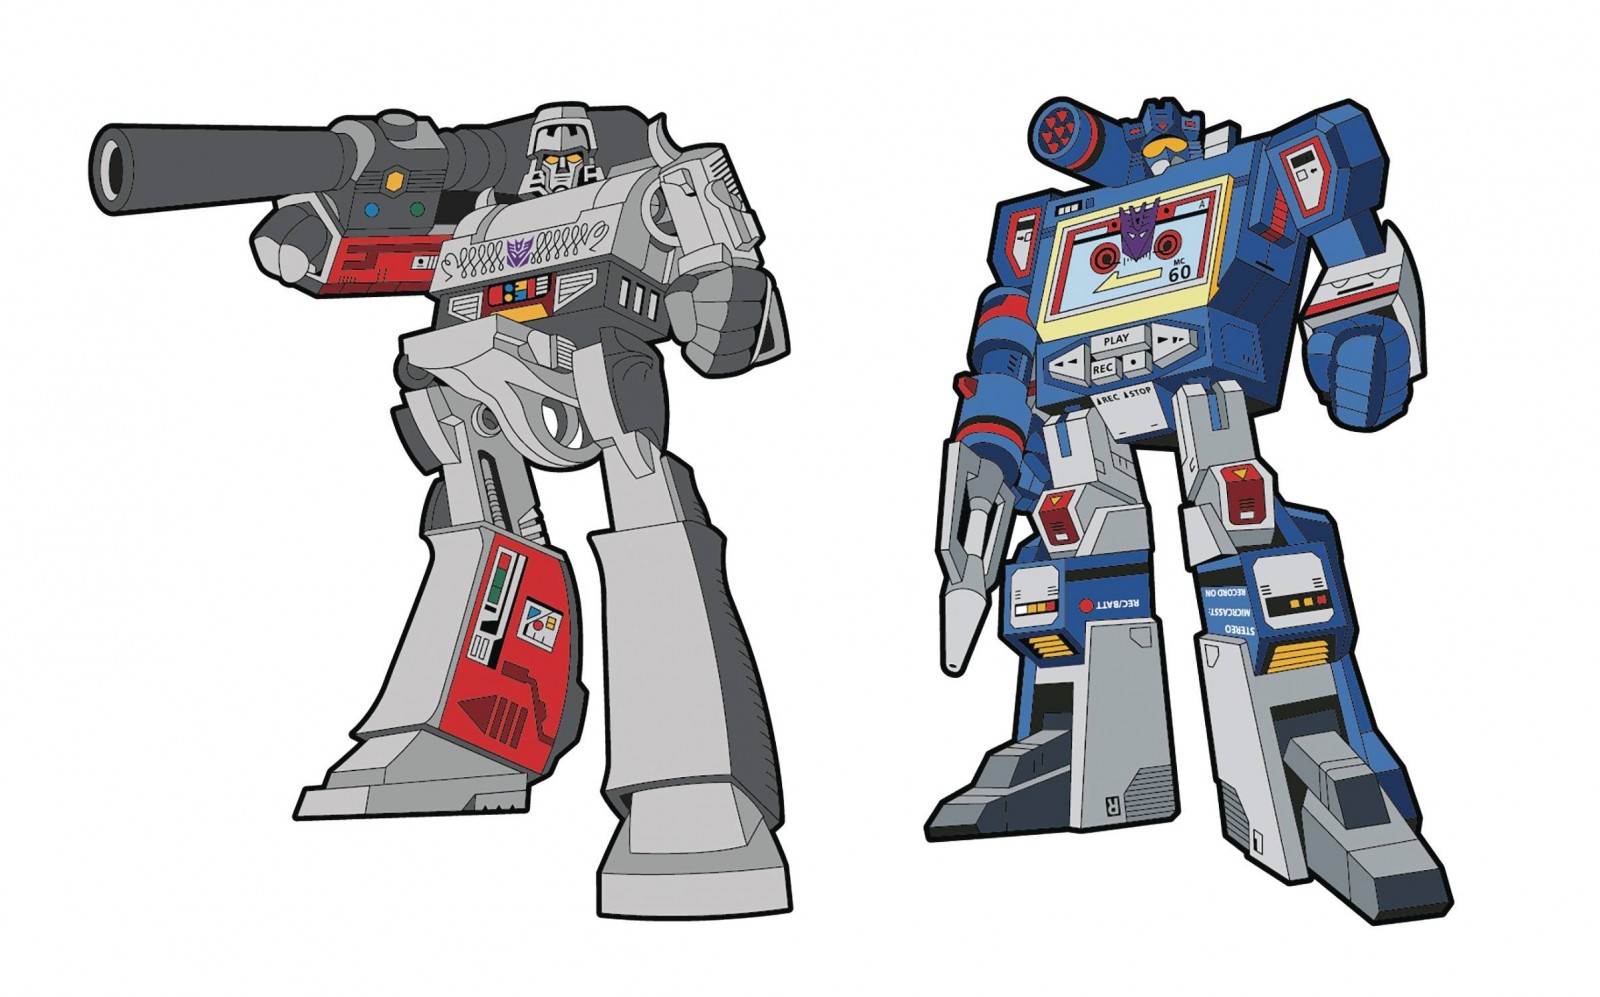 Transformers News: New Collectable Transformers Merchandise From Icon Heroes